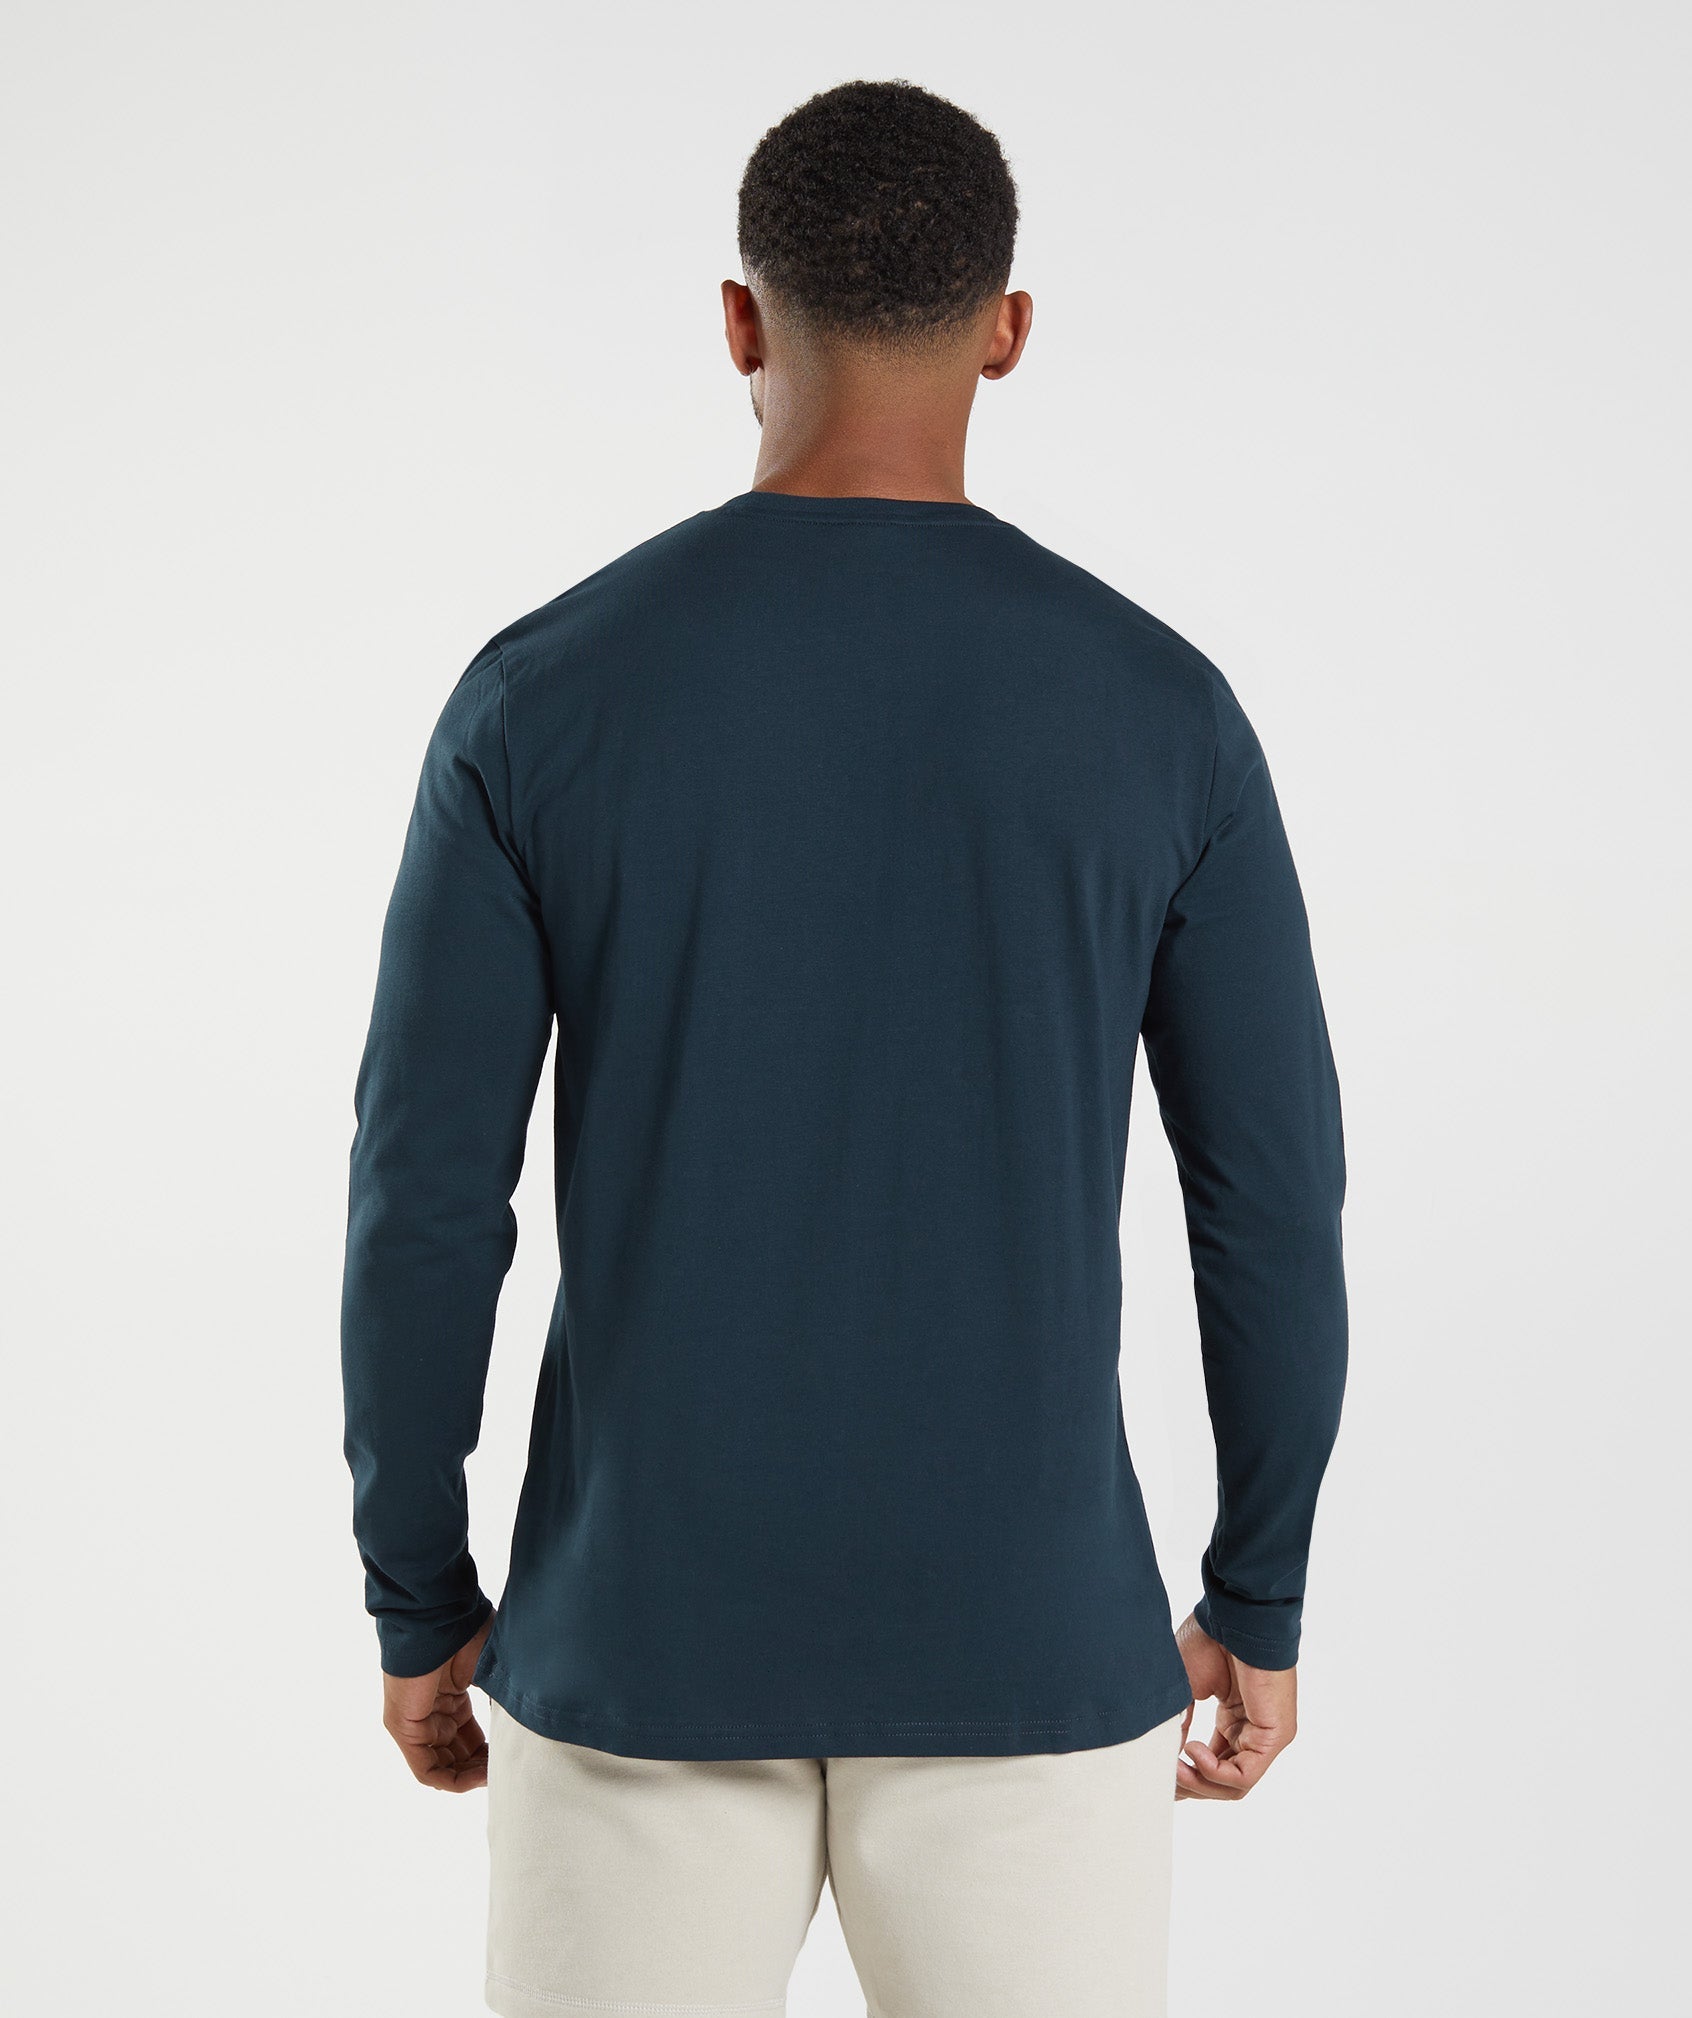 Crest Long Sleeve T-Shirt in Navy